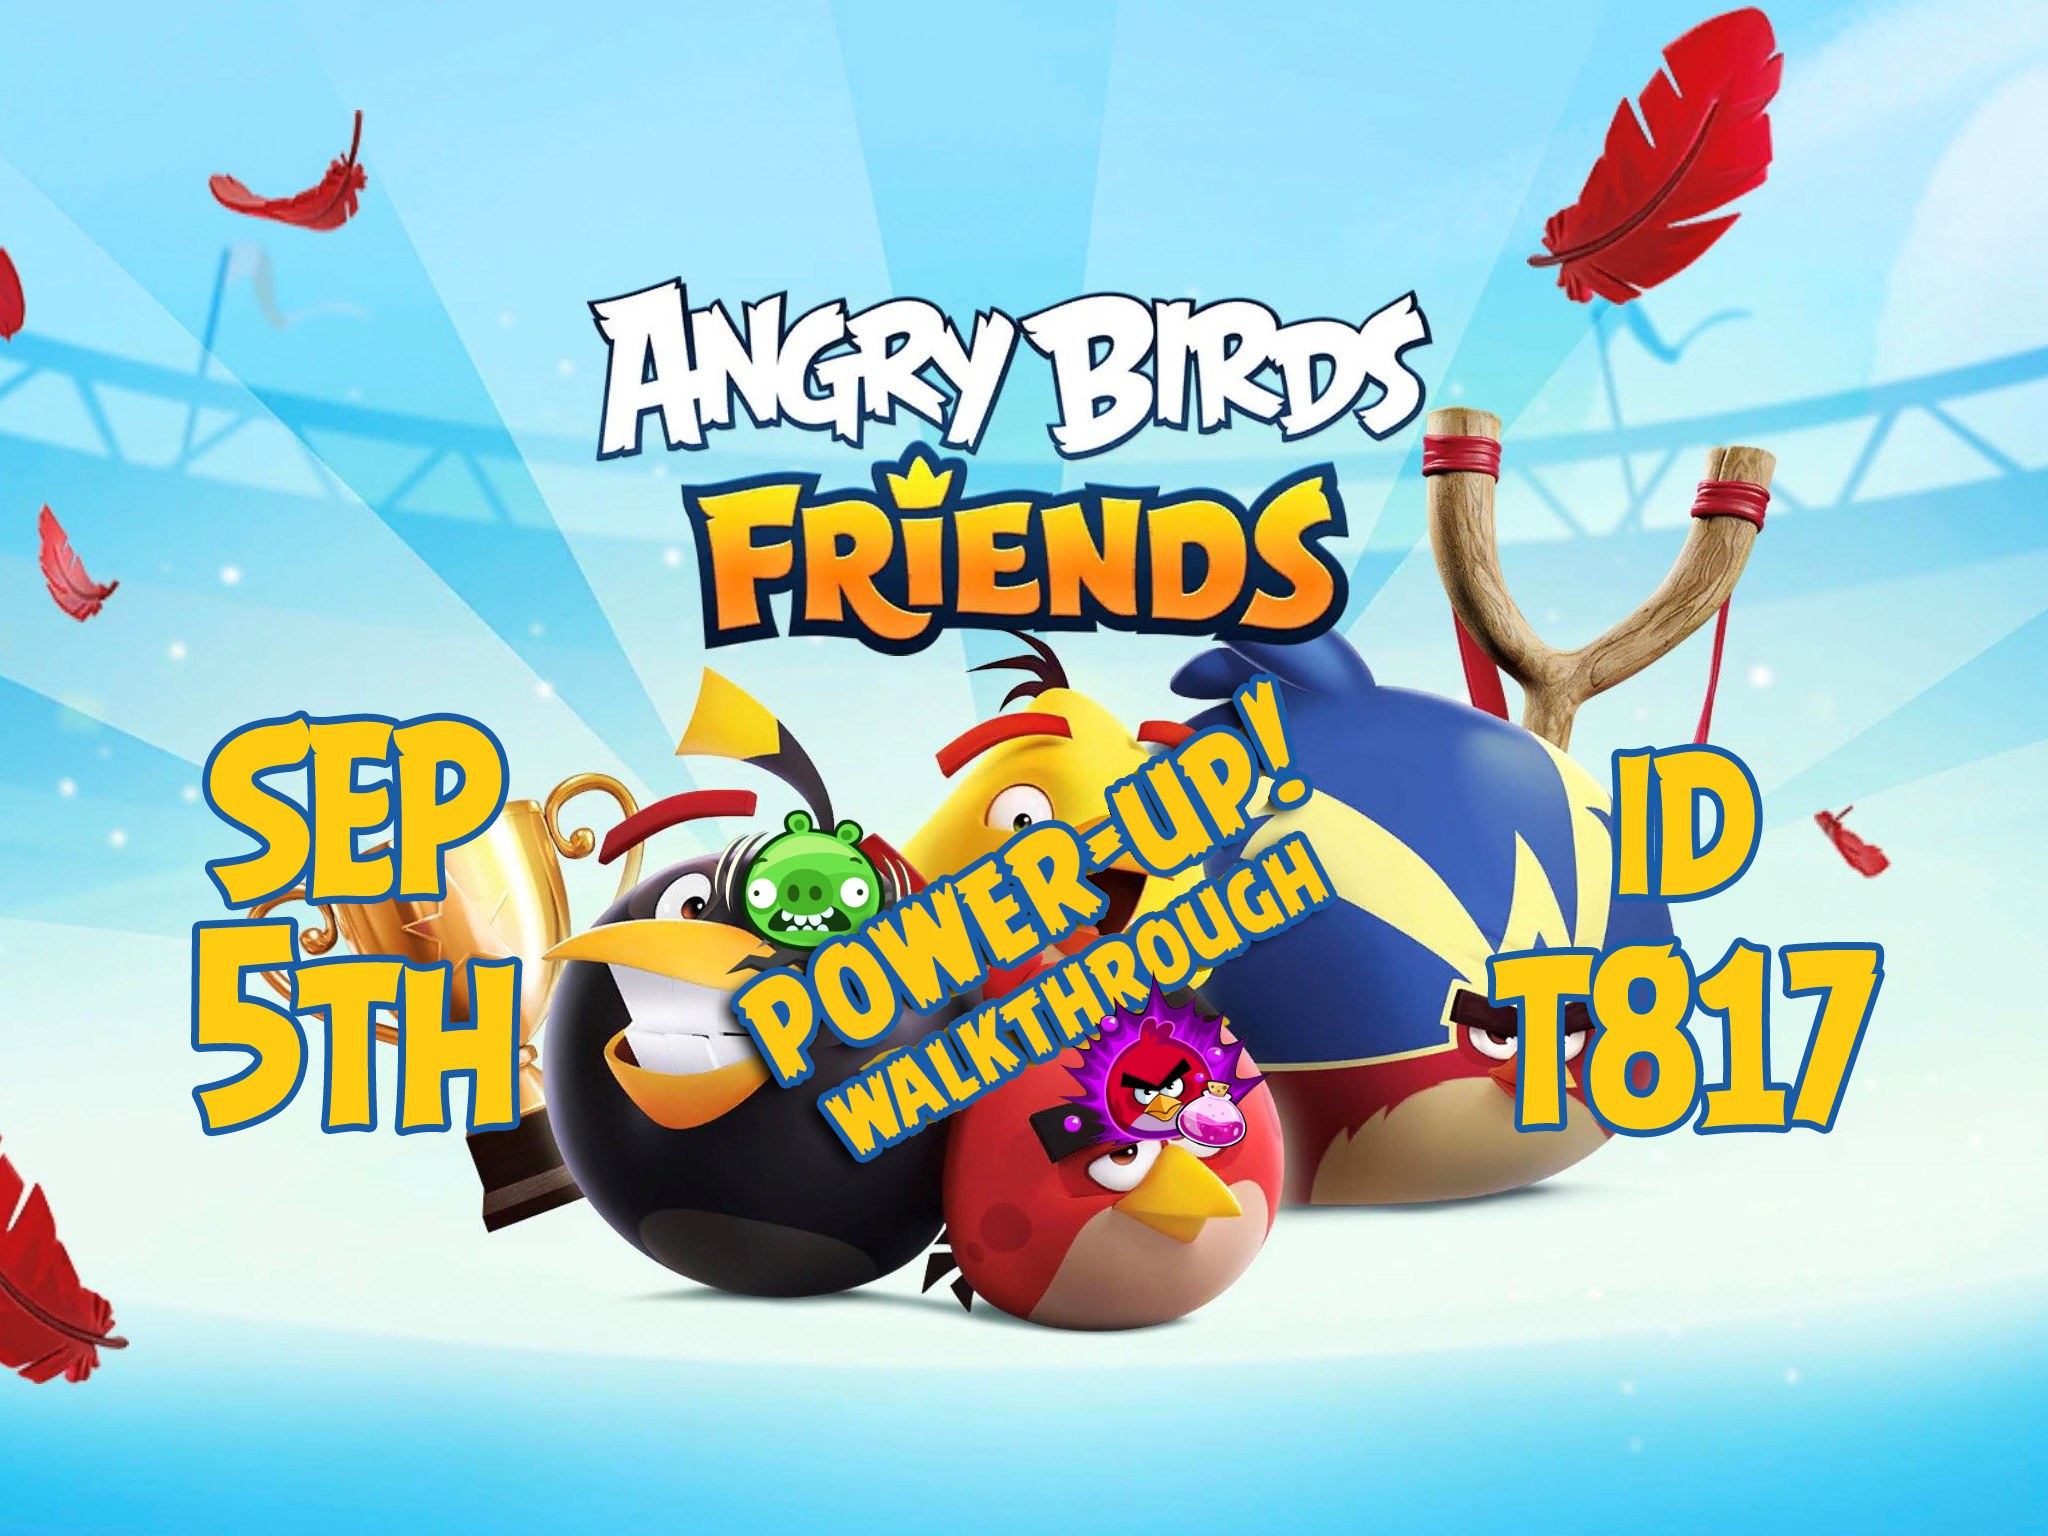 Angry-Birds-Friends-Tournament-T817-Feature-Image-PU